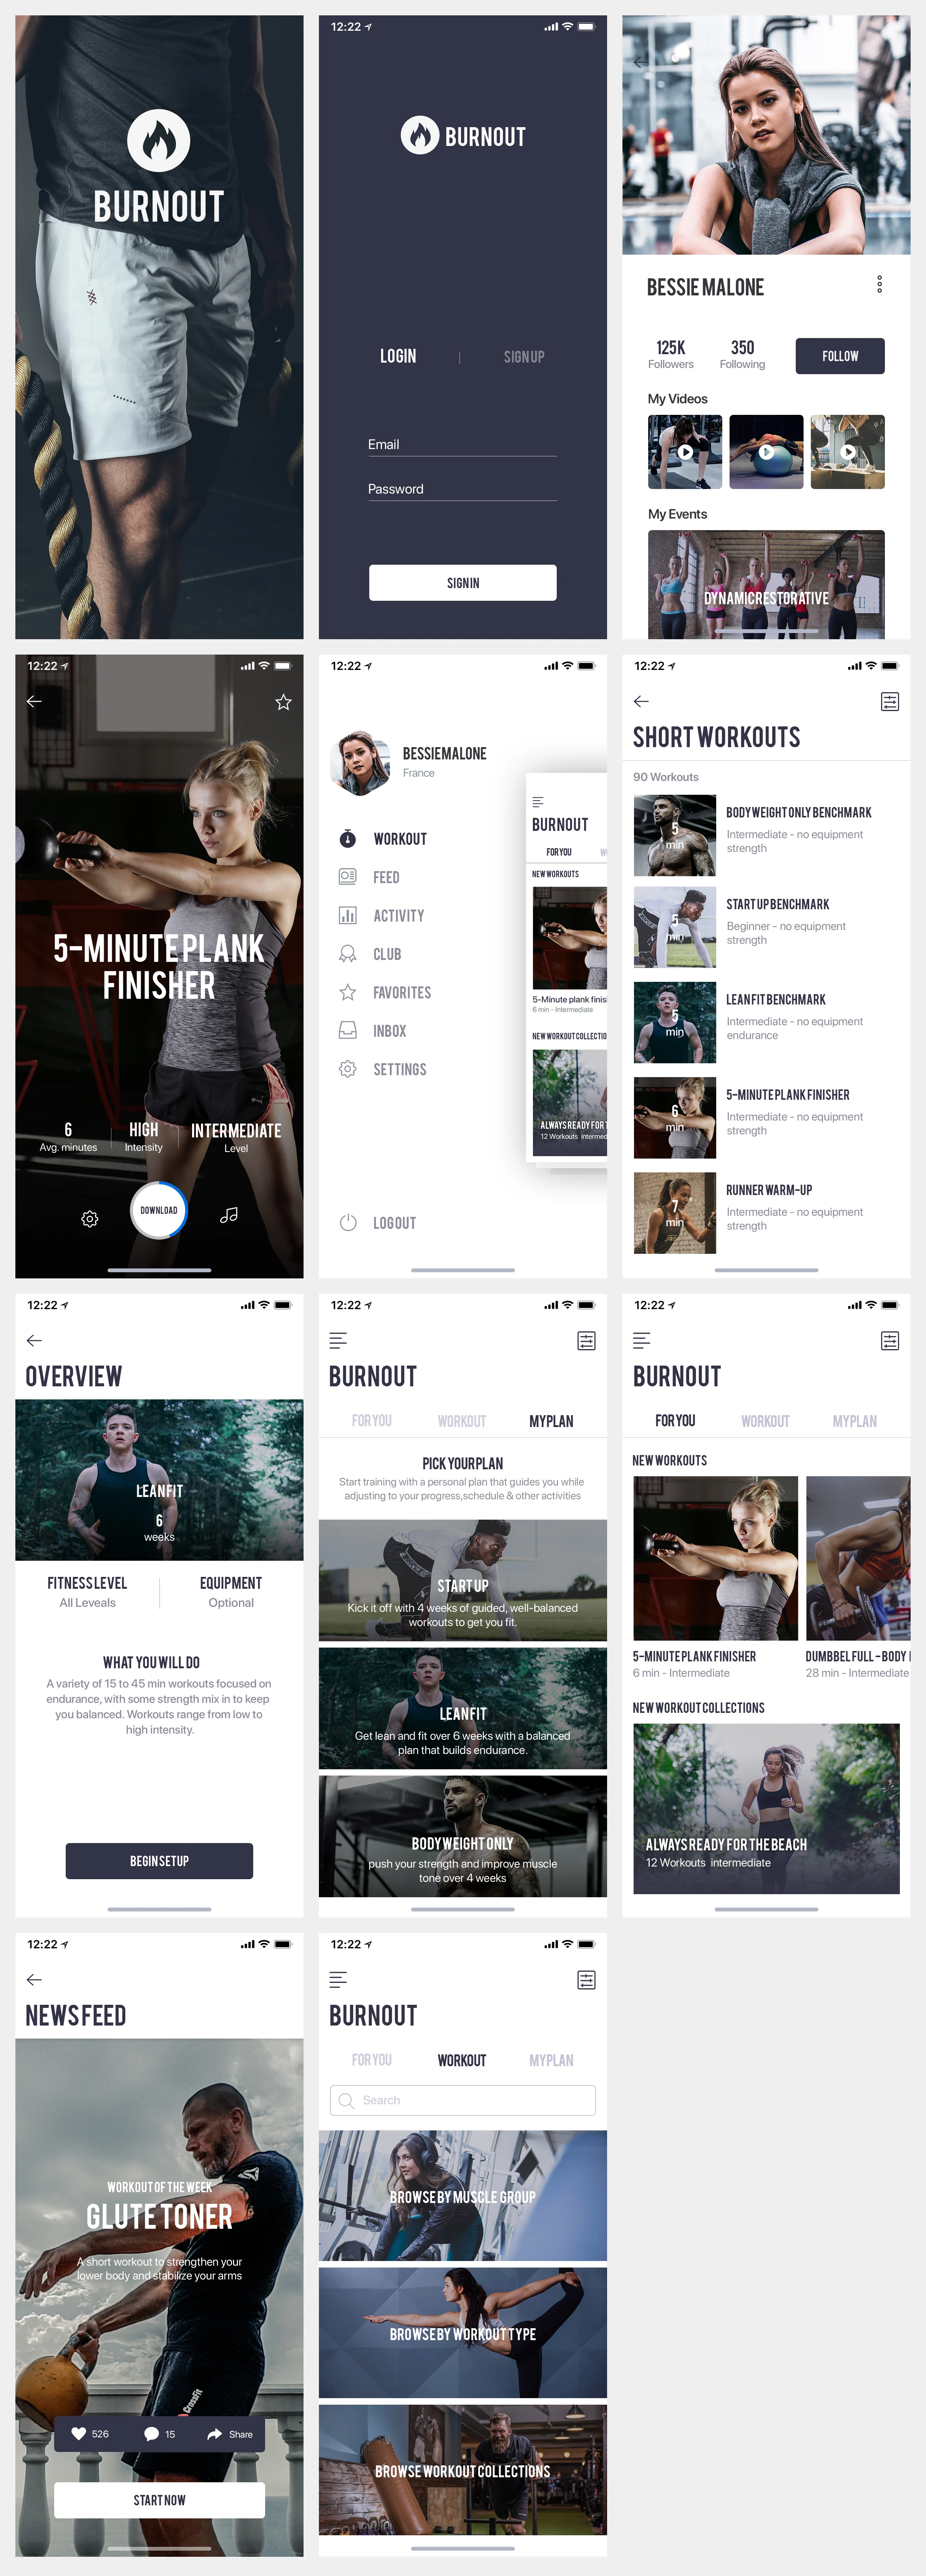 Burnout - Fitness App free for Photoshop - Burnout is a fitness UI kit, total 11 app screen in PSD format. Feel free to download, customize and use on your personal or commercial projects.